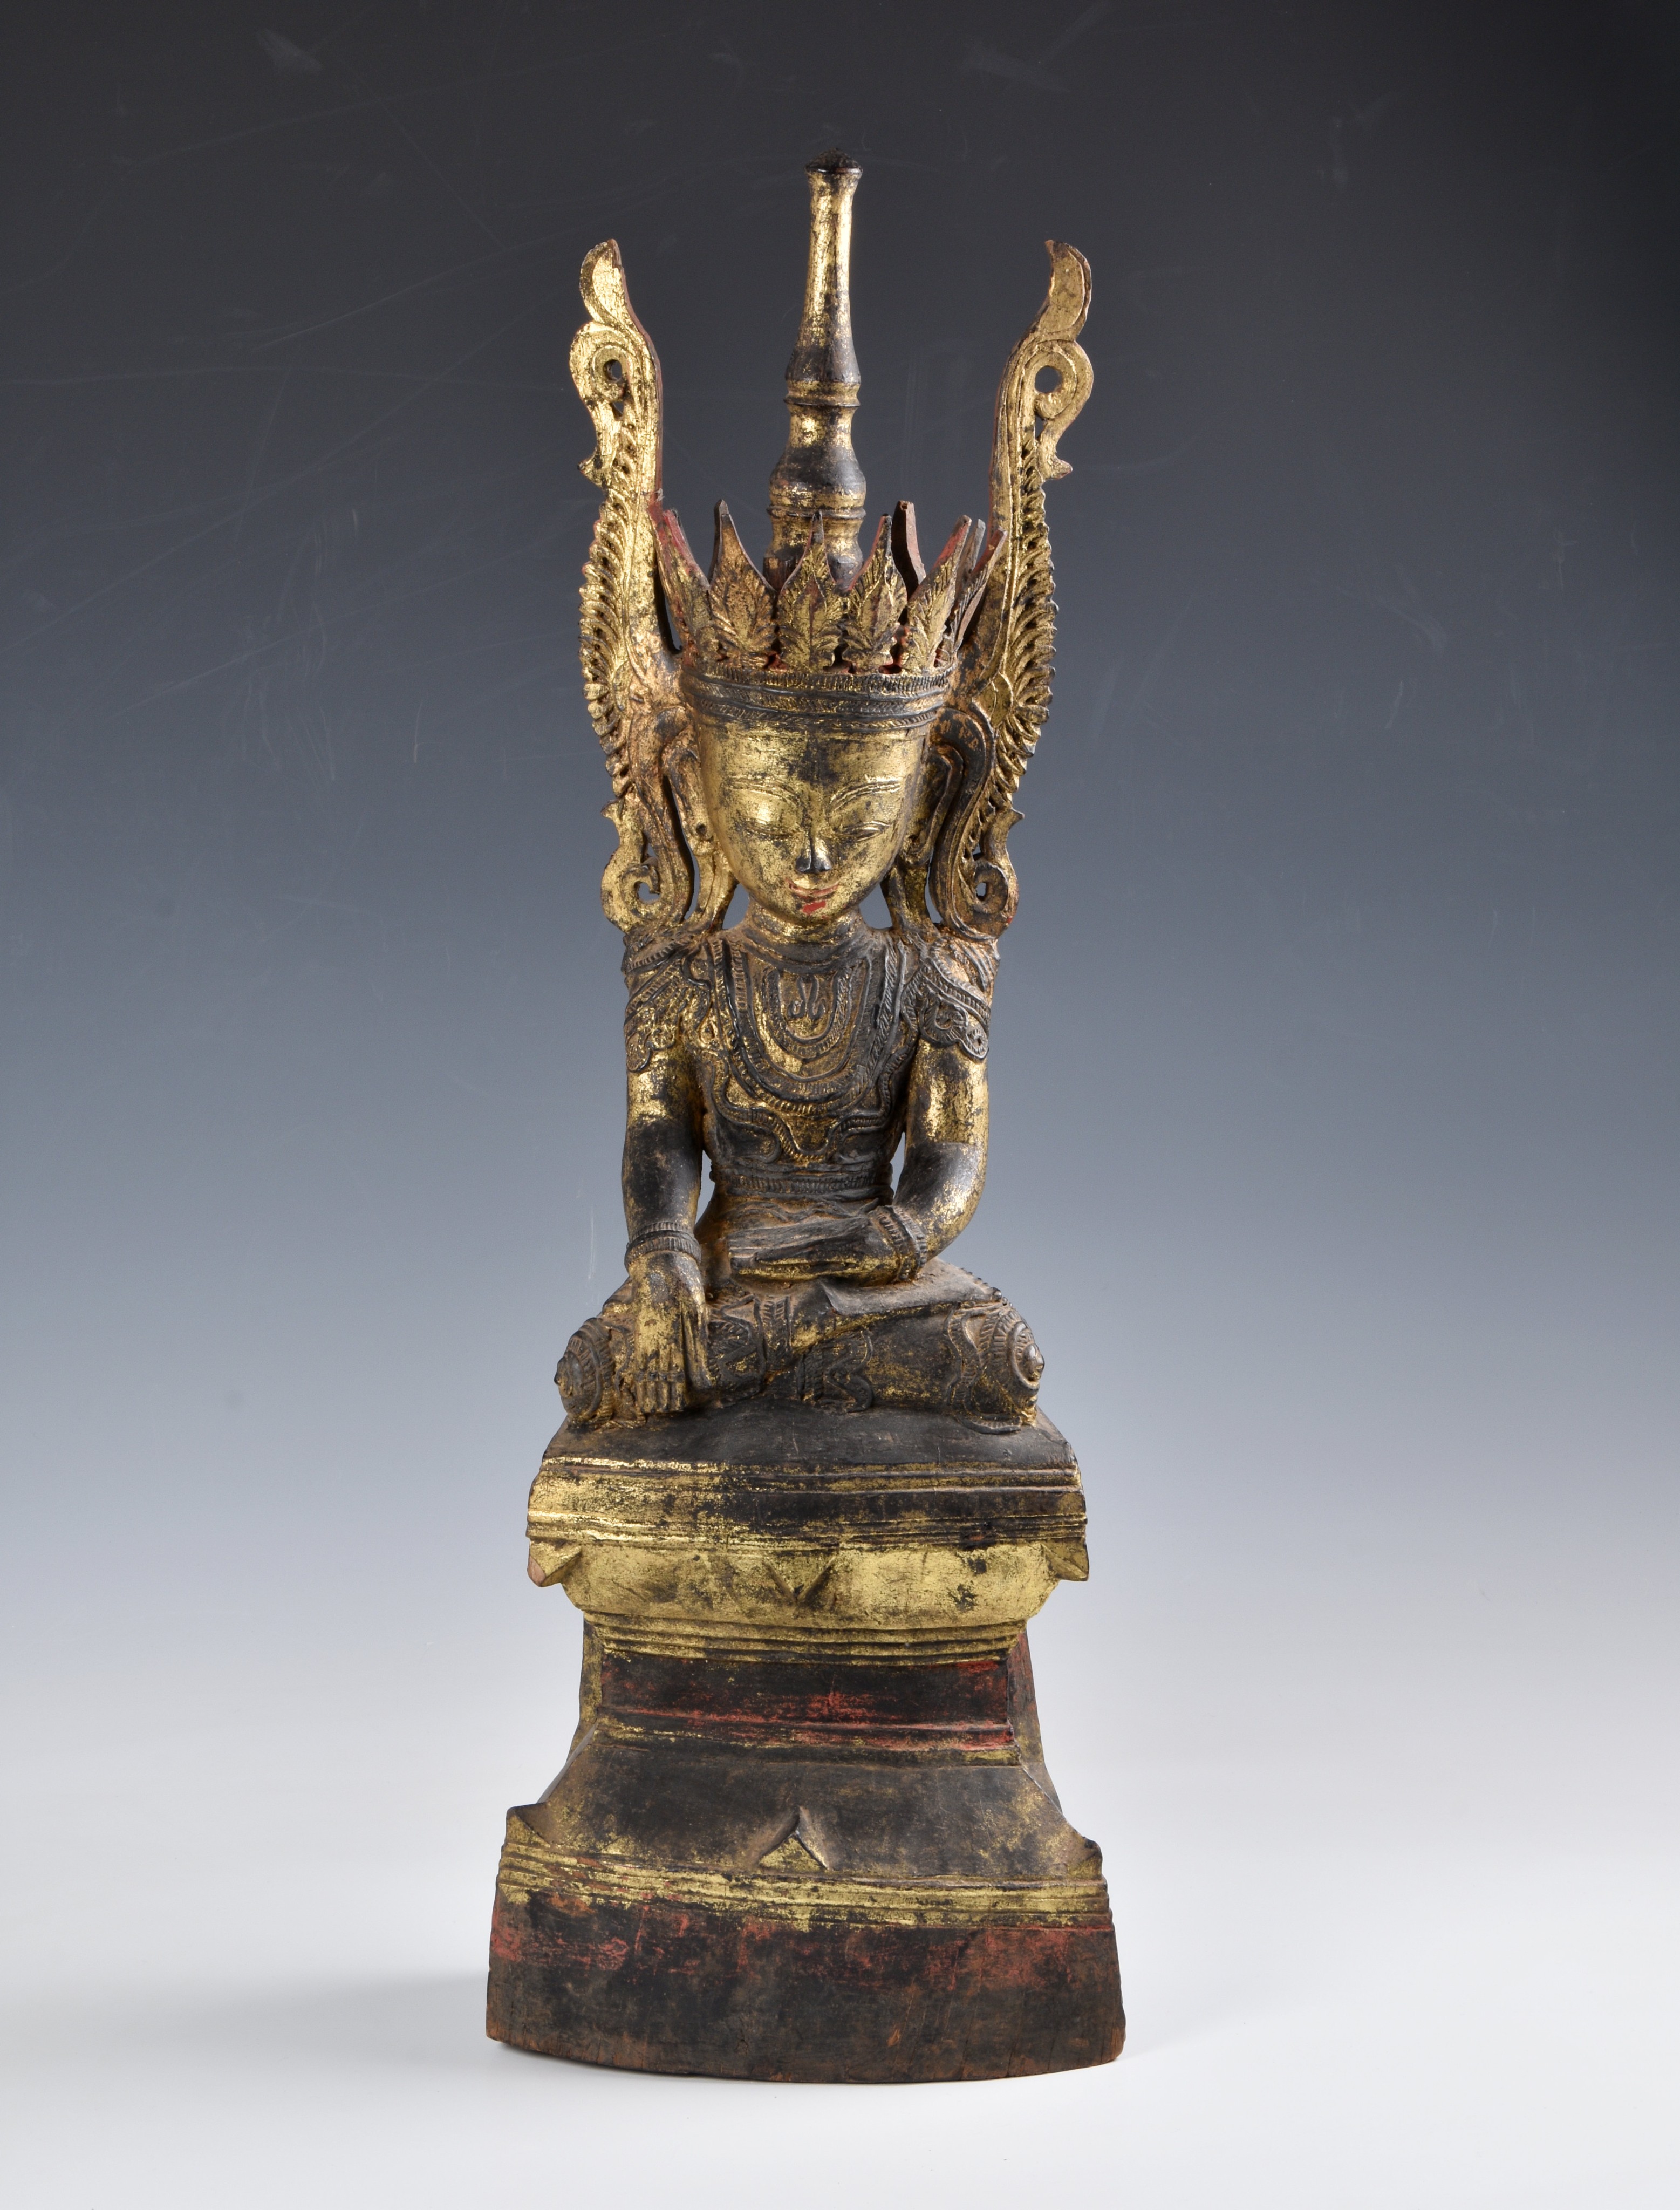 A Burmese, Shan States style carved gilt decorated Buddha, probably 19th century, the carved